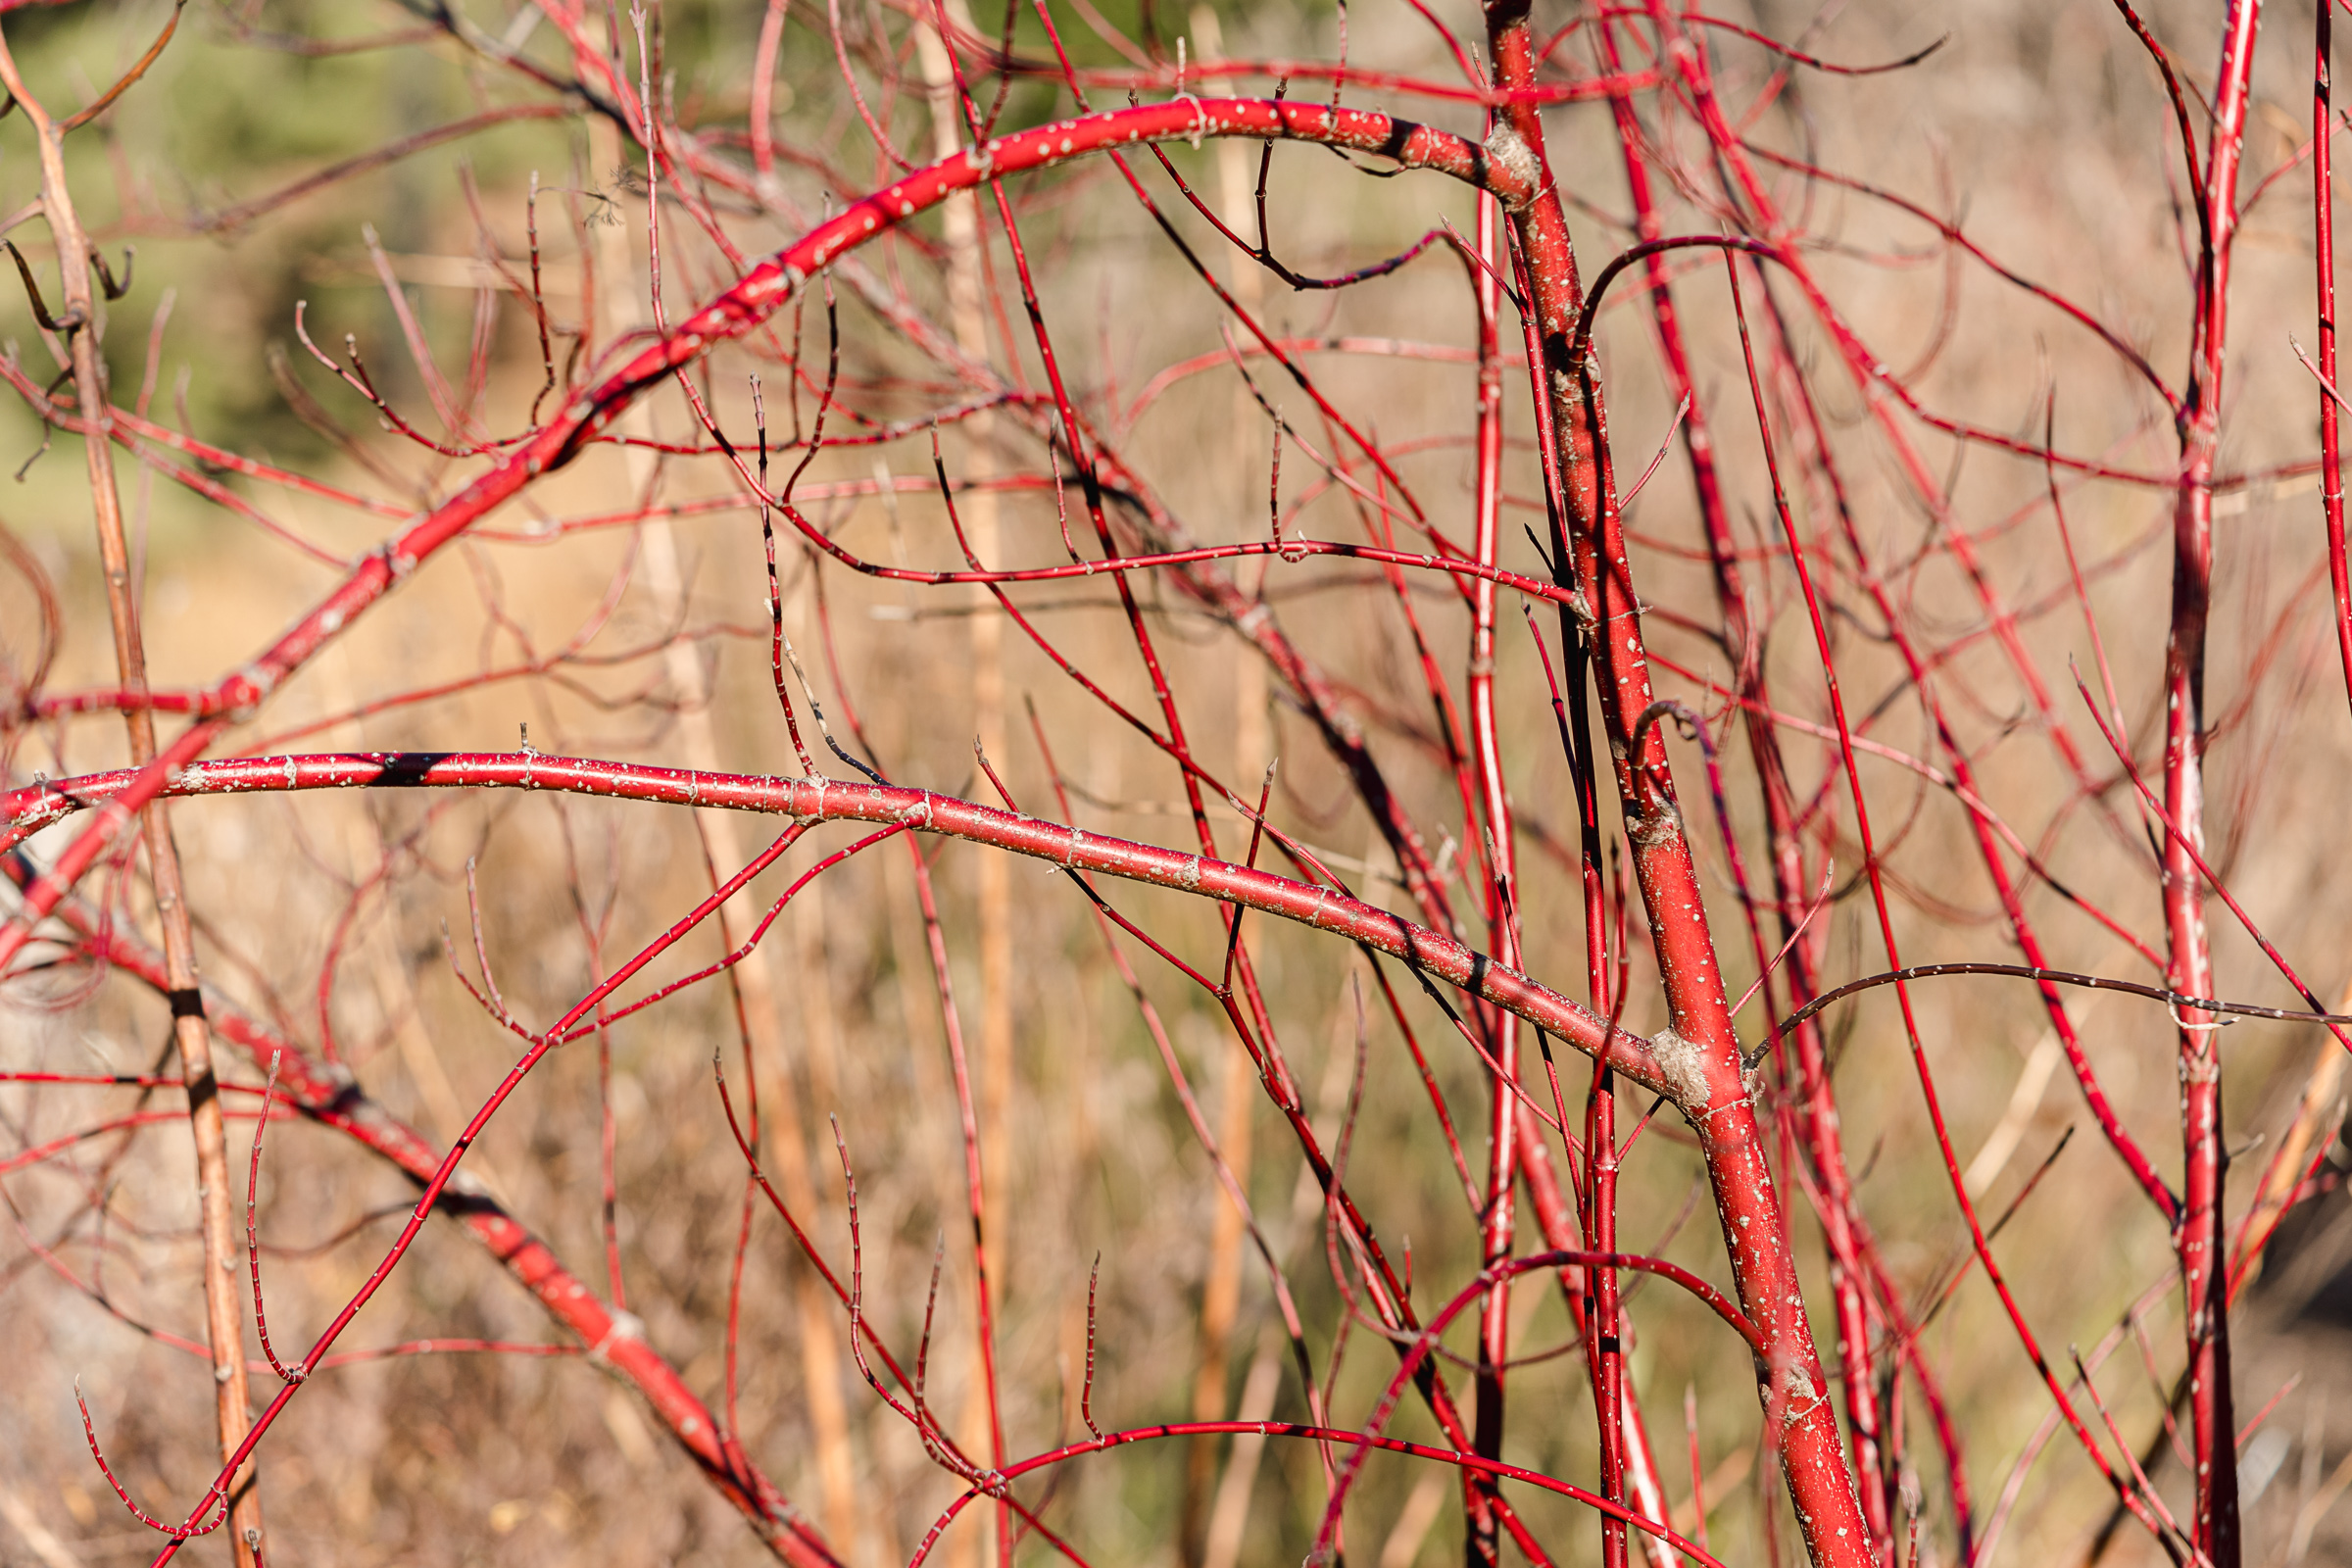 Bright red stems grow amid dry brown grasses